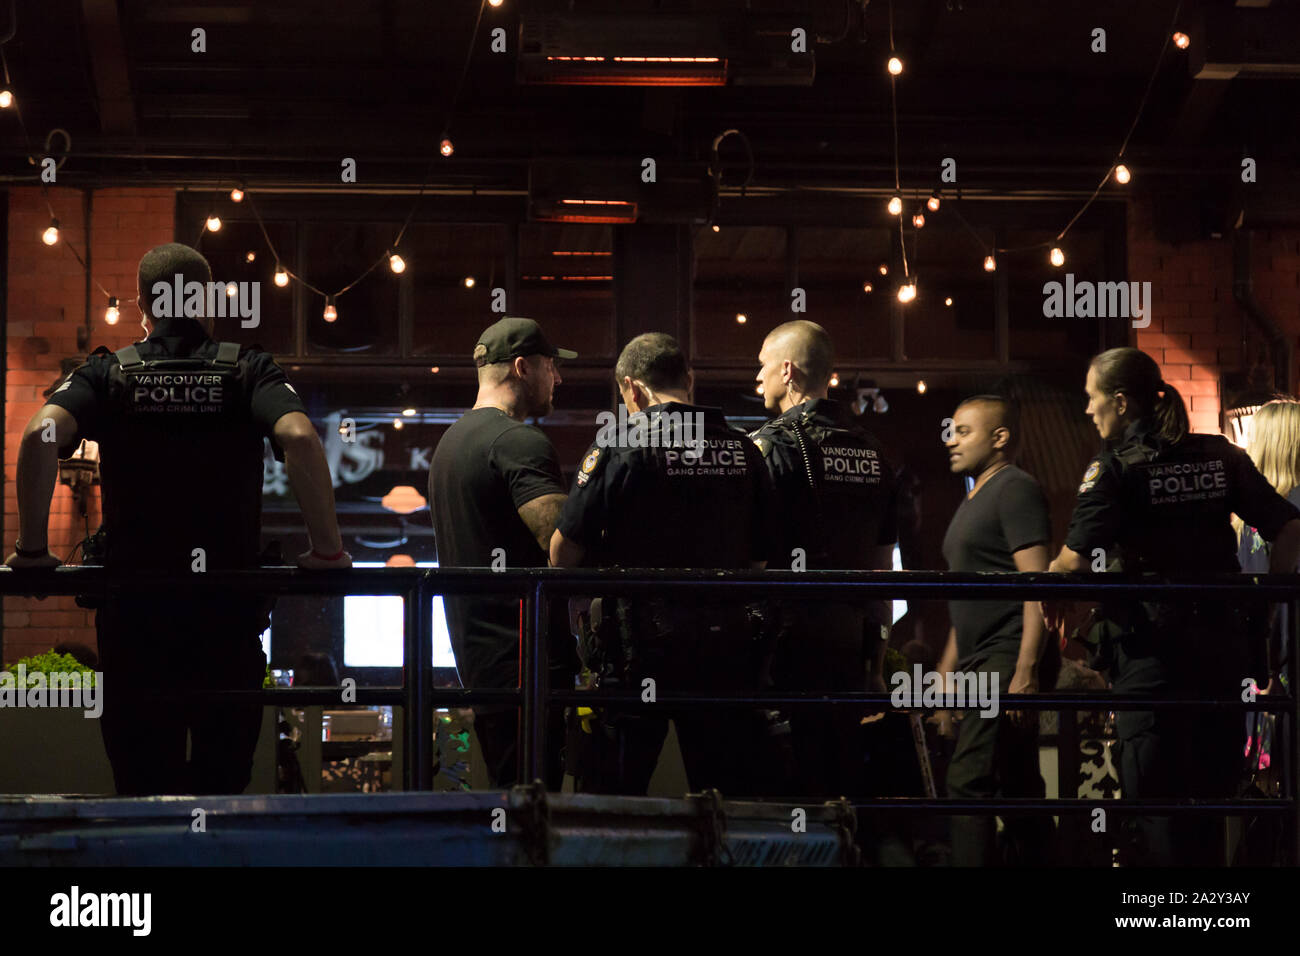 VANCOUVER, BC, CANADA - SEPT 7, 2019: The Vancouver Police' Gang Unit questioning a member of the public during the week of increase violent crime on Stock Photo